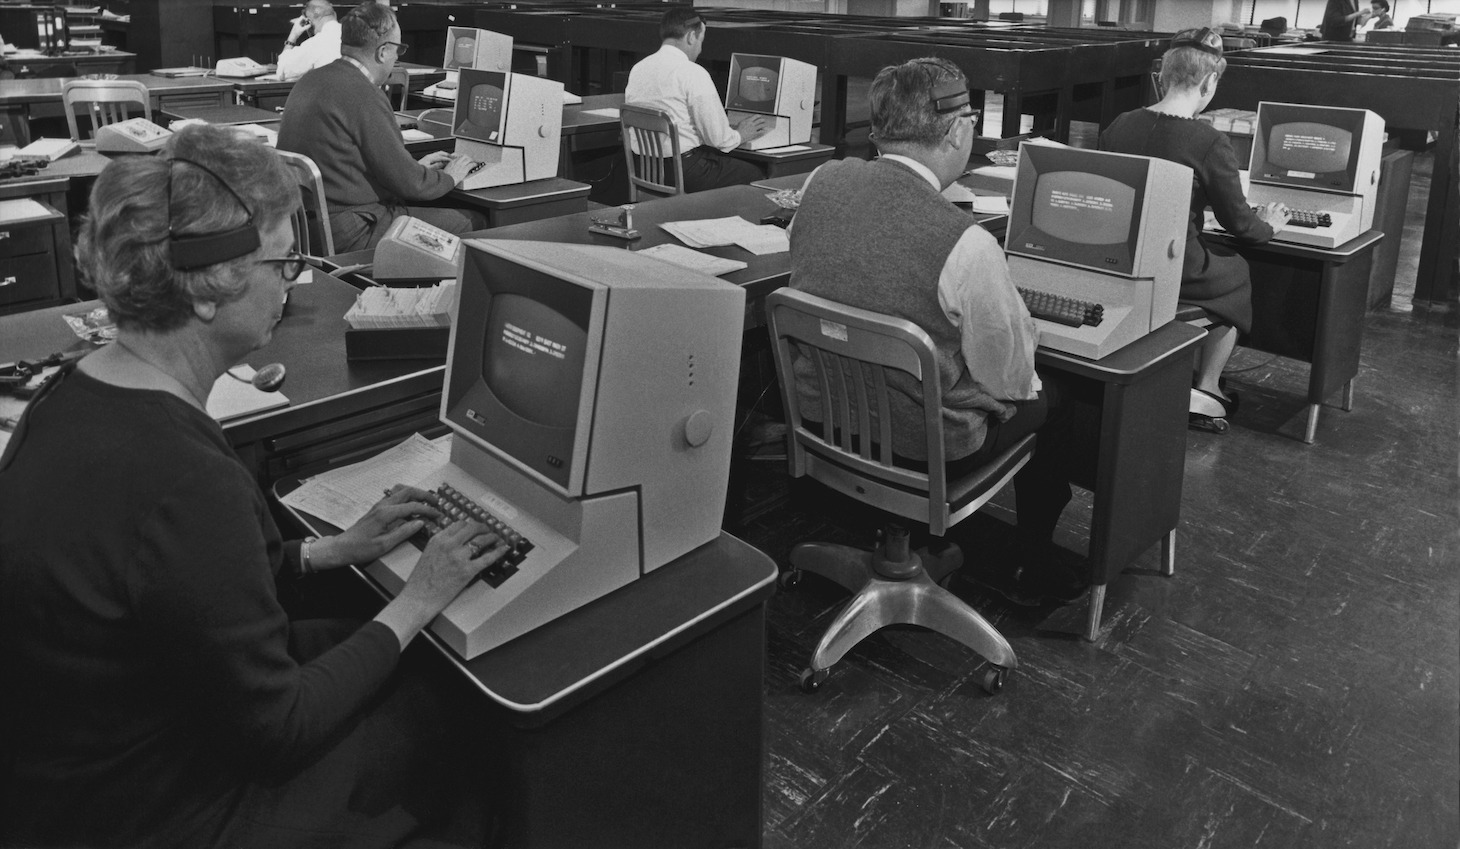 A group of office workers using telephone headsets and computers circa 1965 (Photo by Authenticated News/Archive Photos/Getty Images)